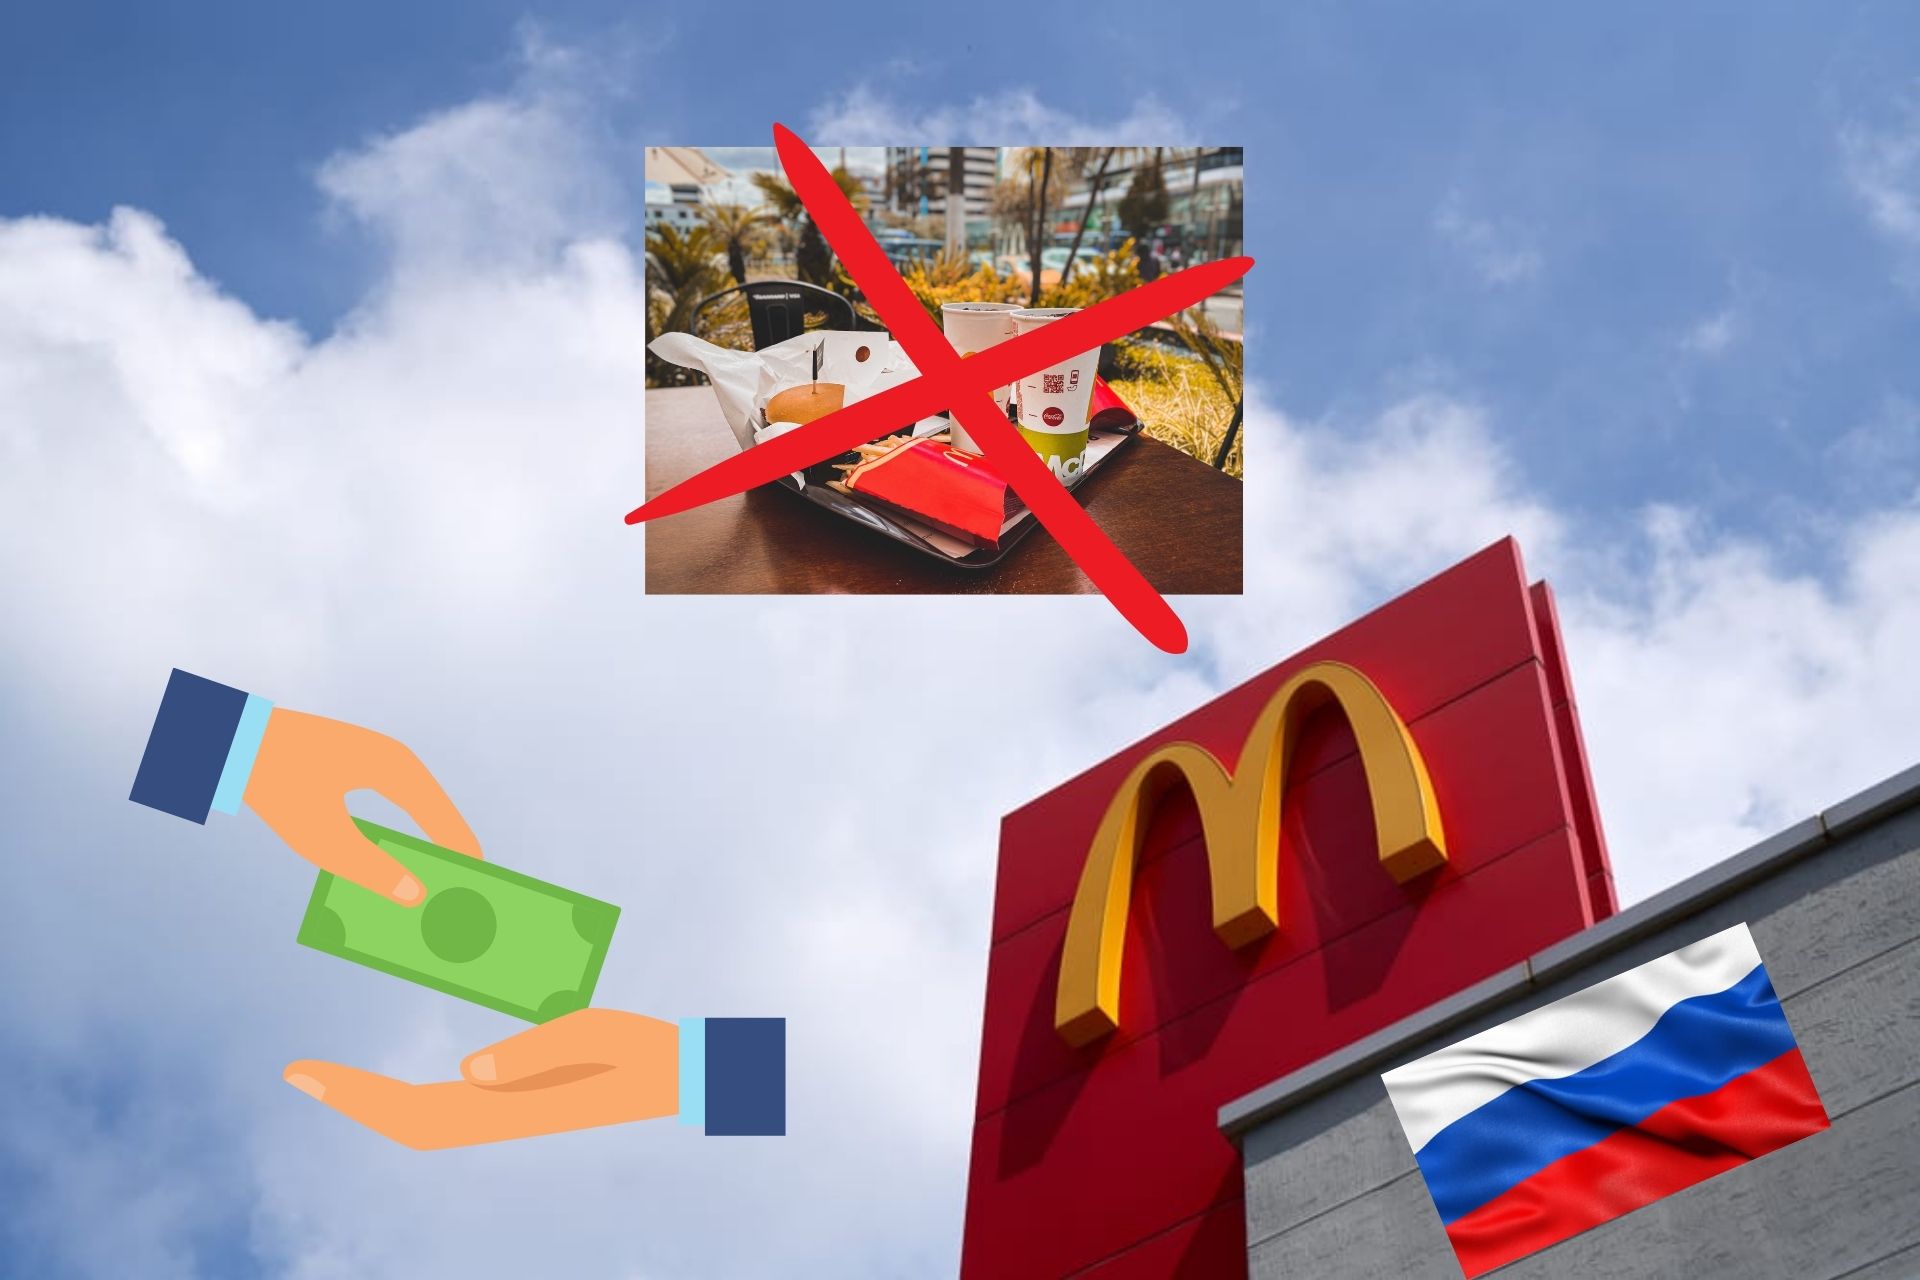 McDonalds to Sell Its Russian Business